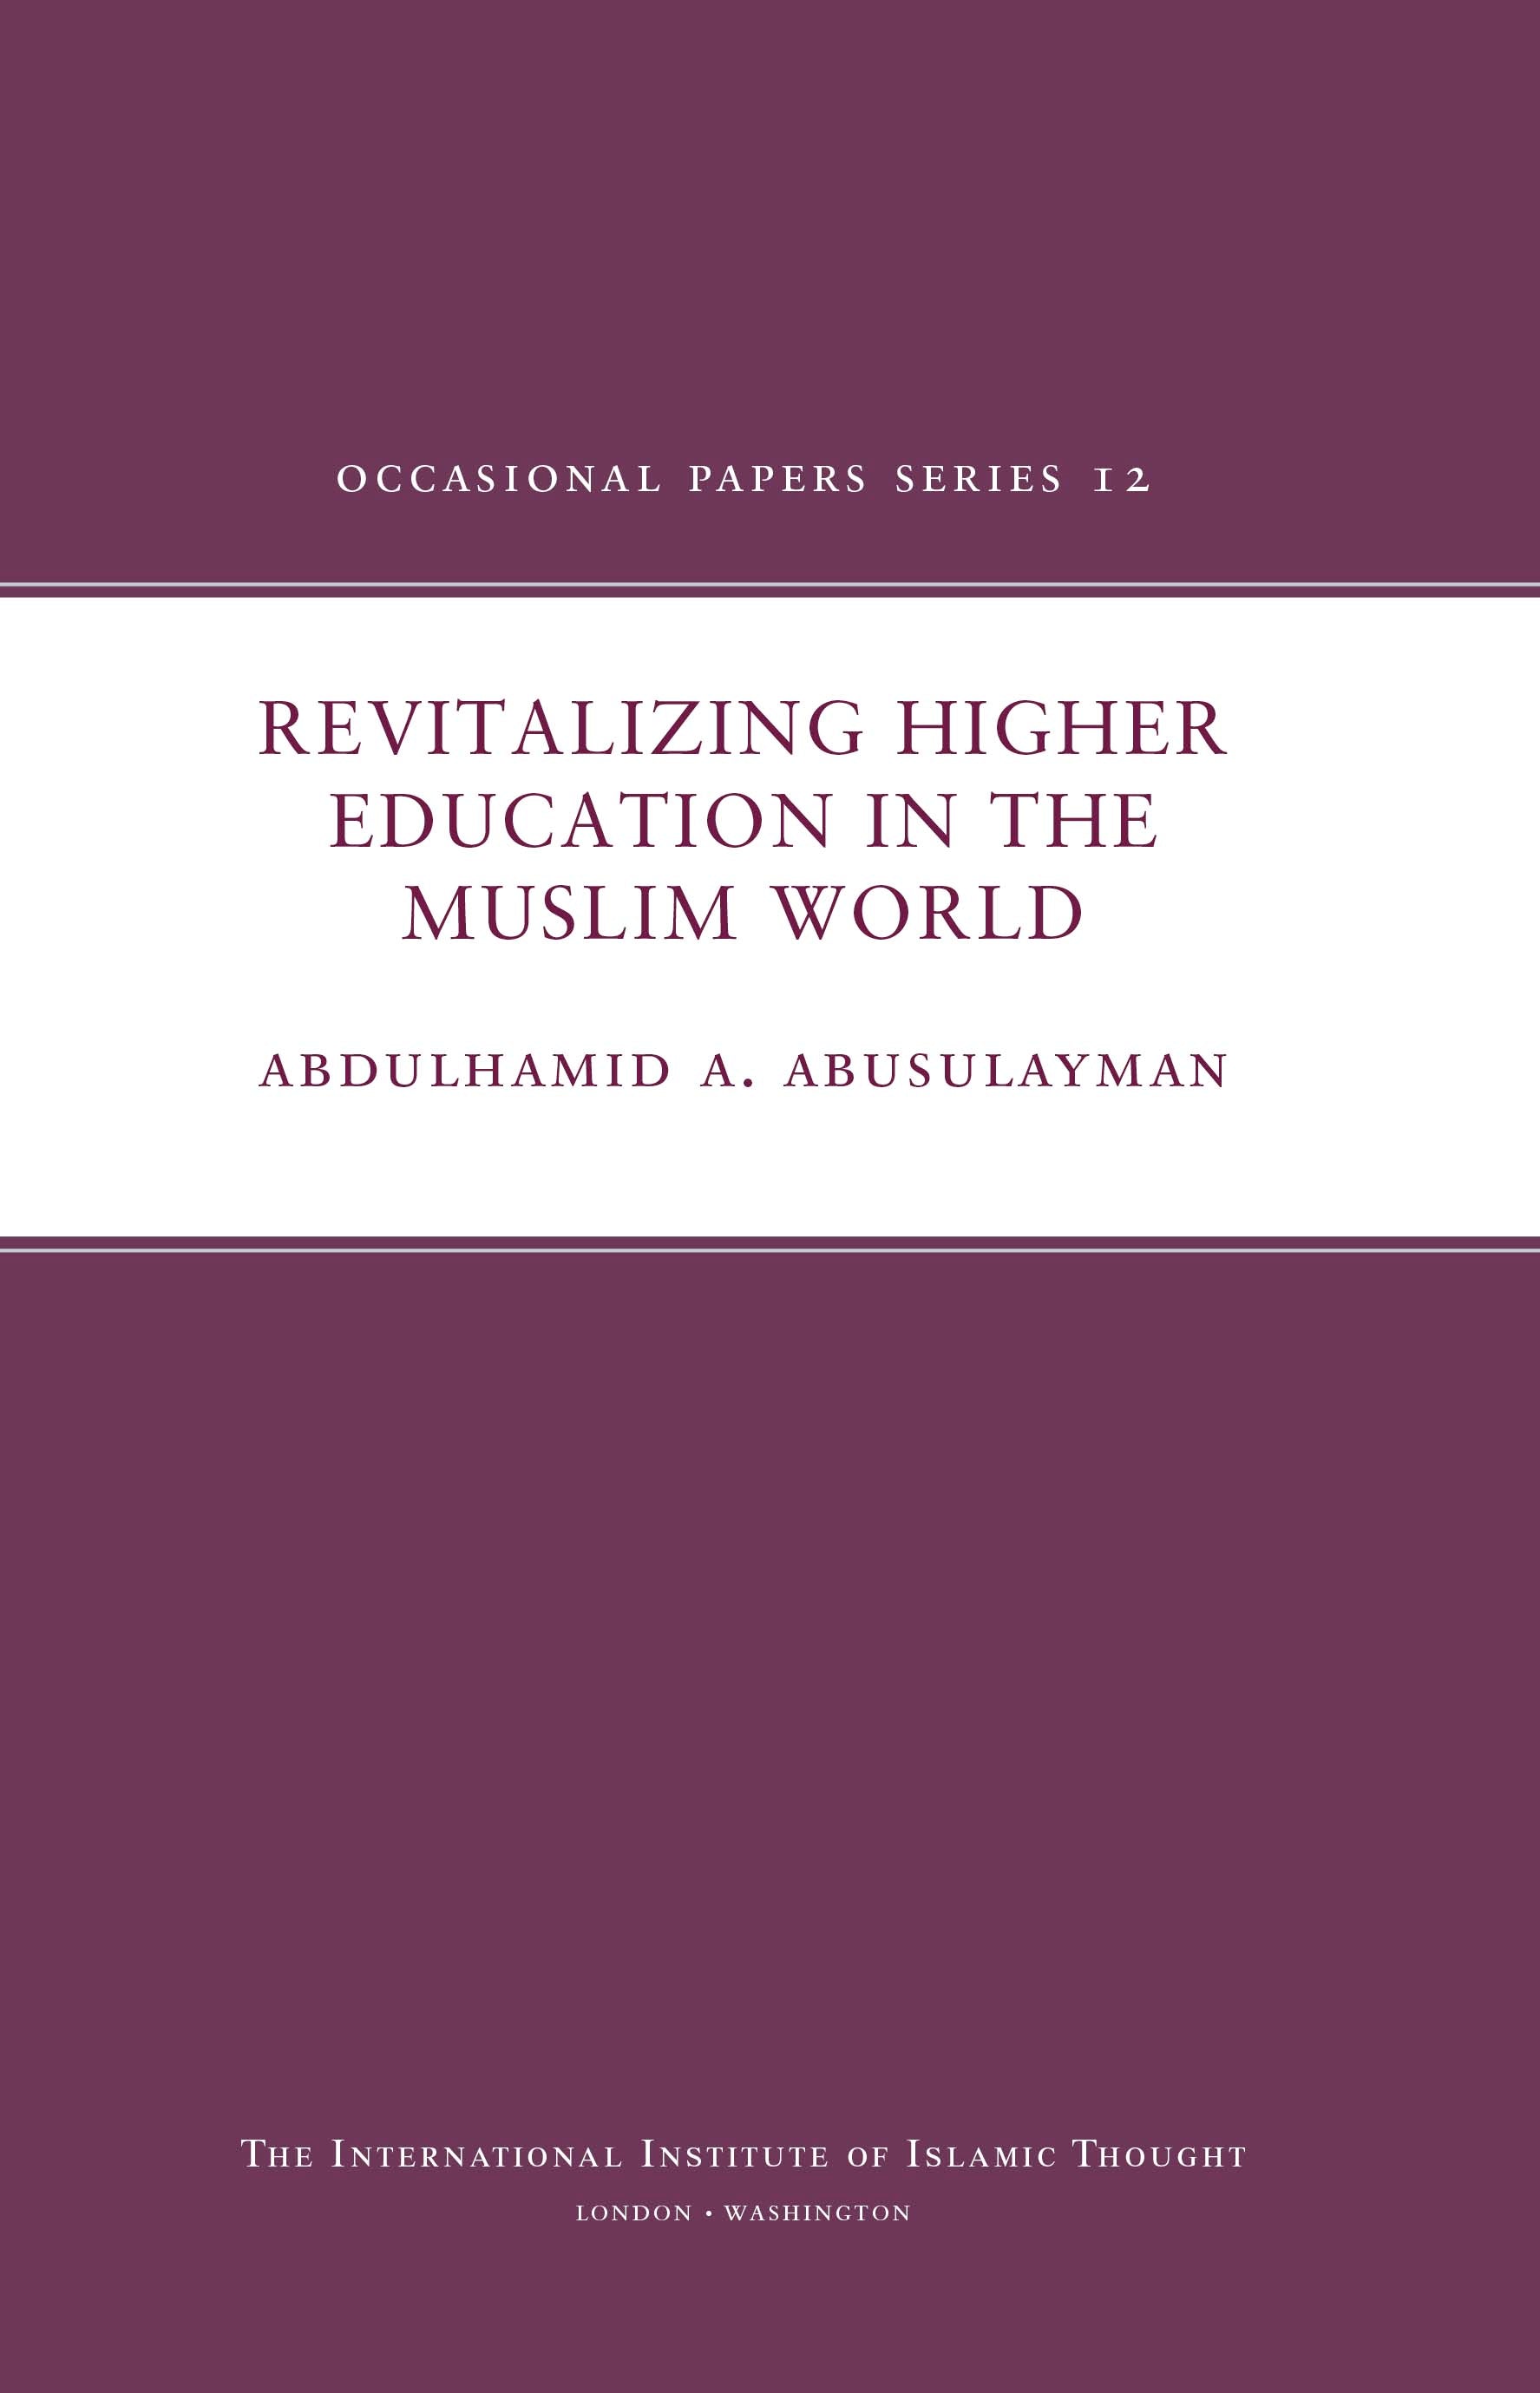 Revitalizing Higher Education in the Muslim World